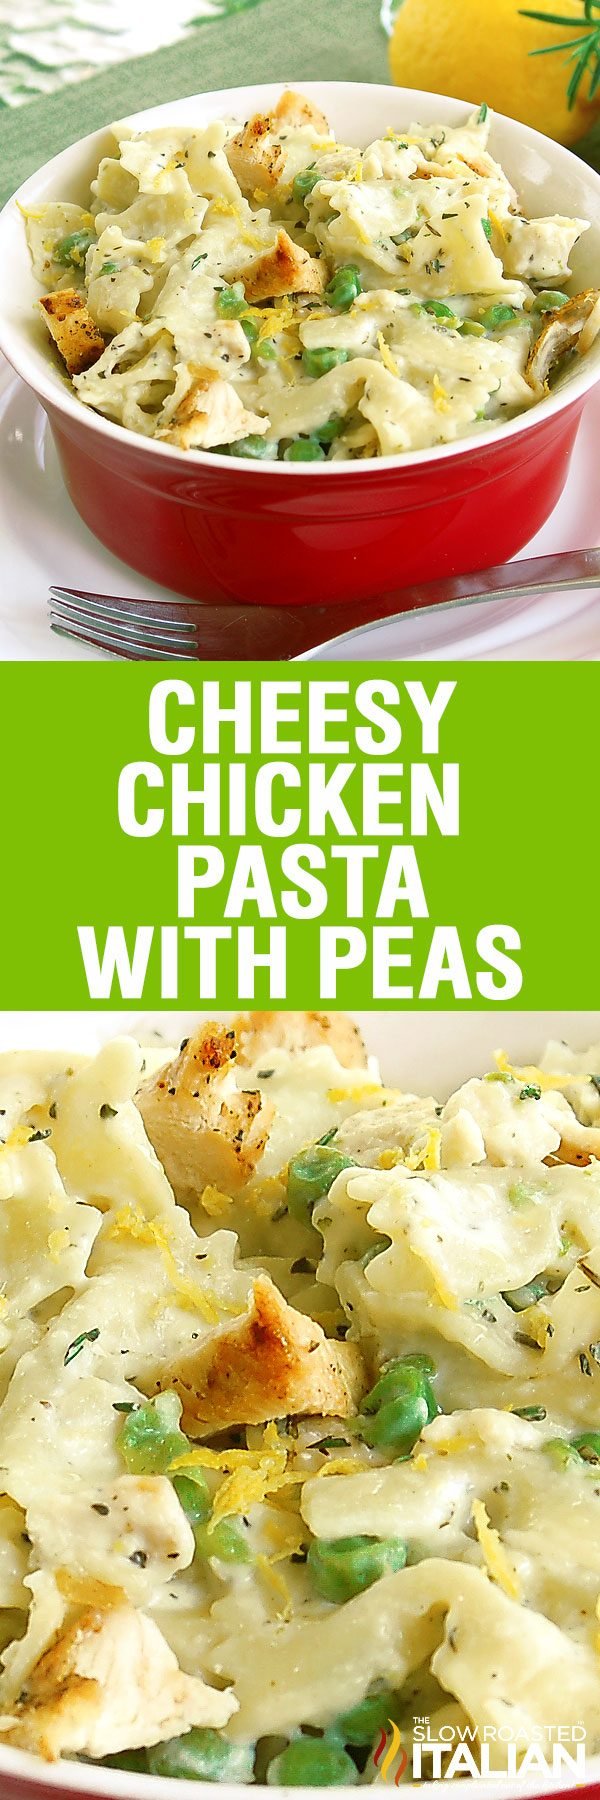 Rich and creamy cheese sauce over farfalle pasta with peas and chicken. Dinner doesn't get much more simple or delicious. With a secret ingredient, that really makes the flavors pop this is going to be your new favorite.